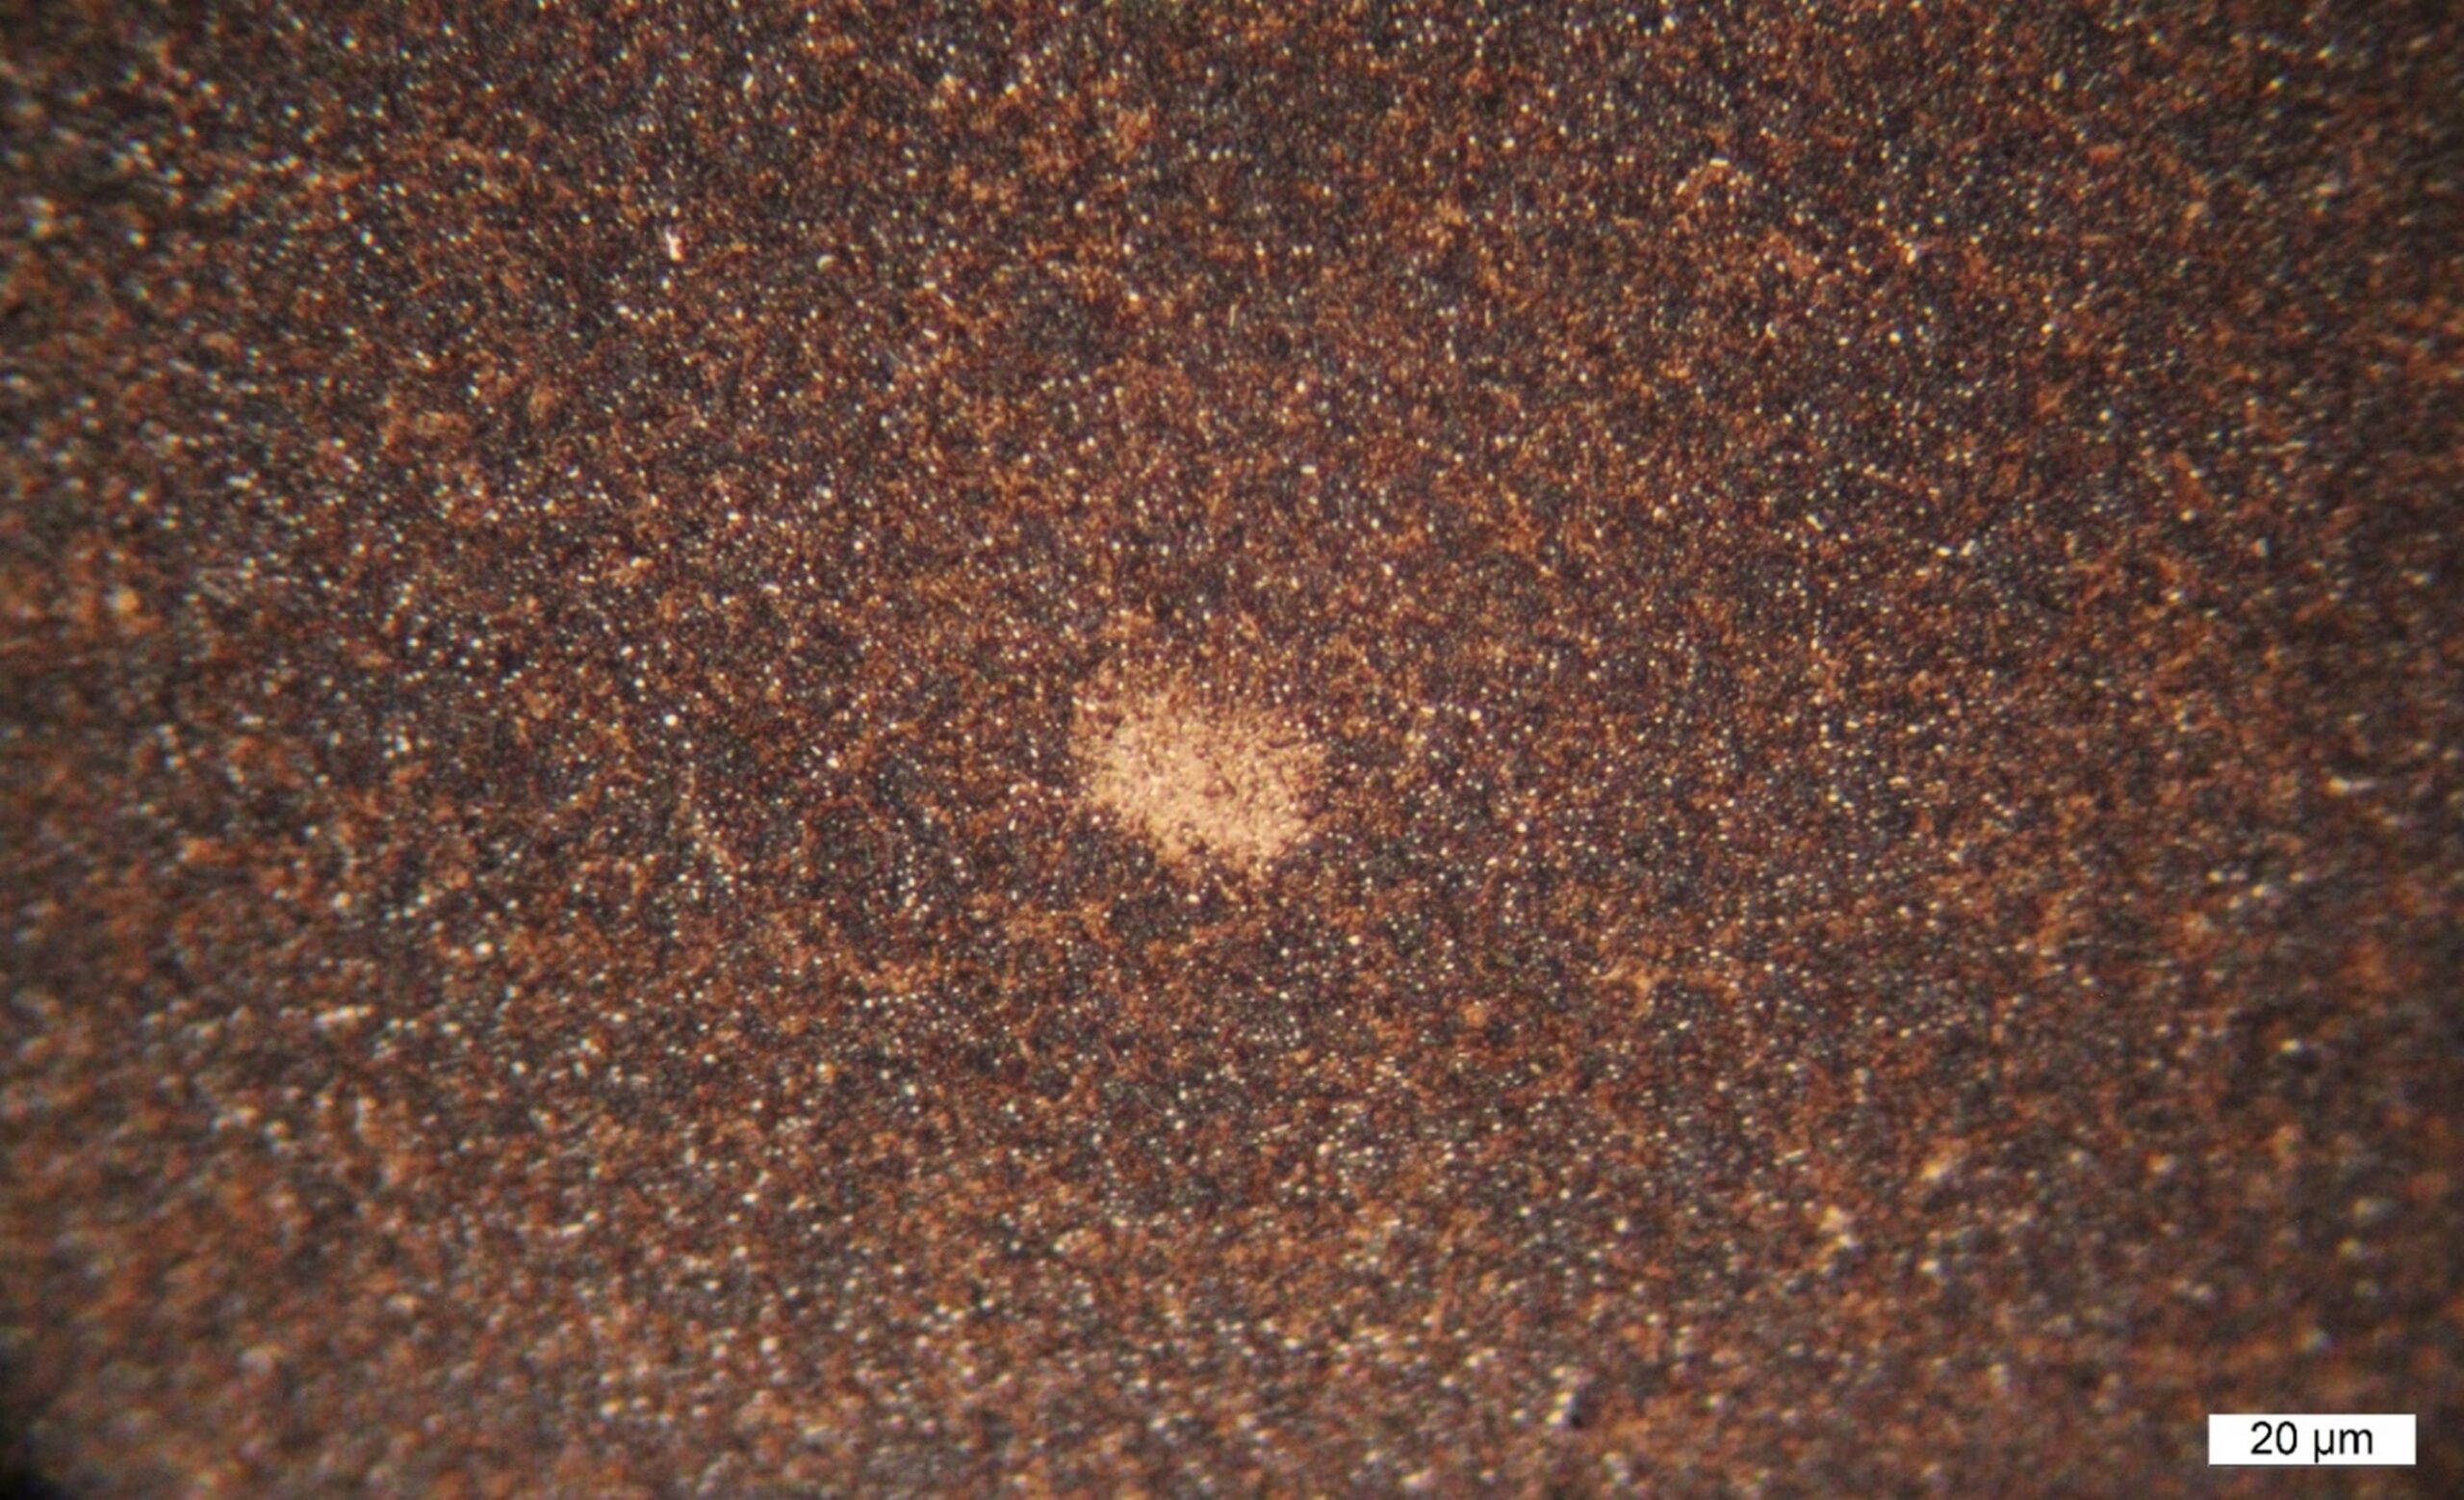 White etching area in an otherwise regular microstructure